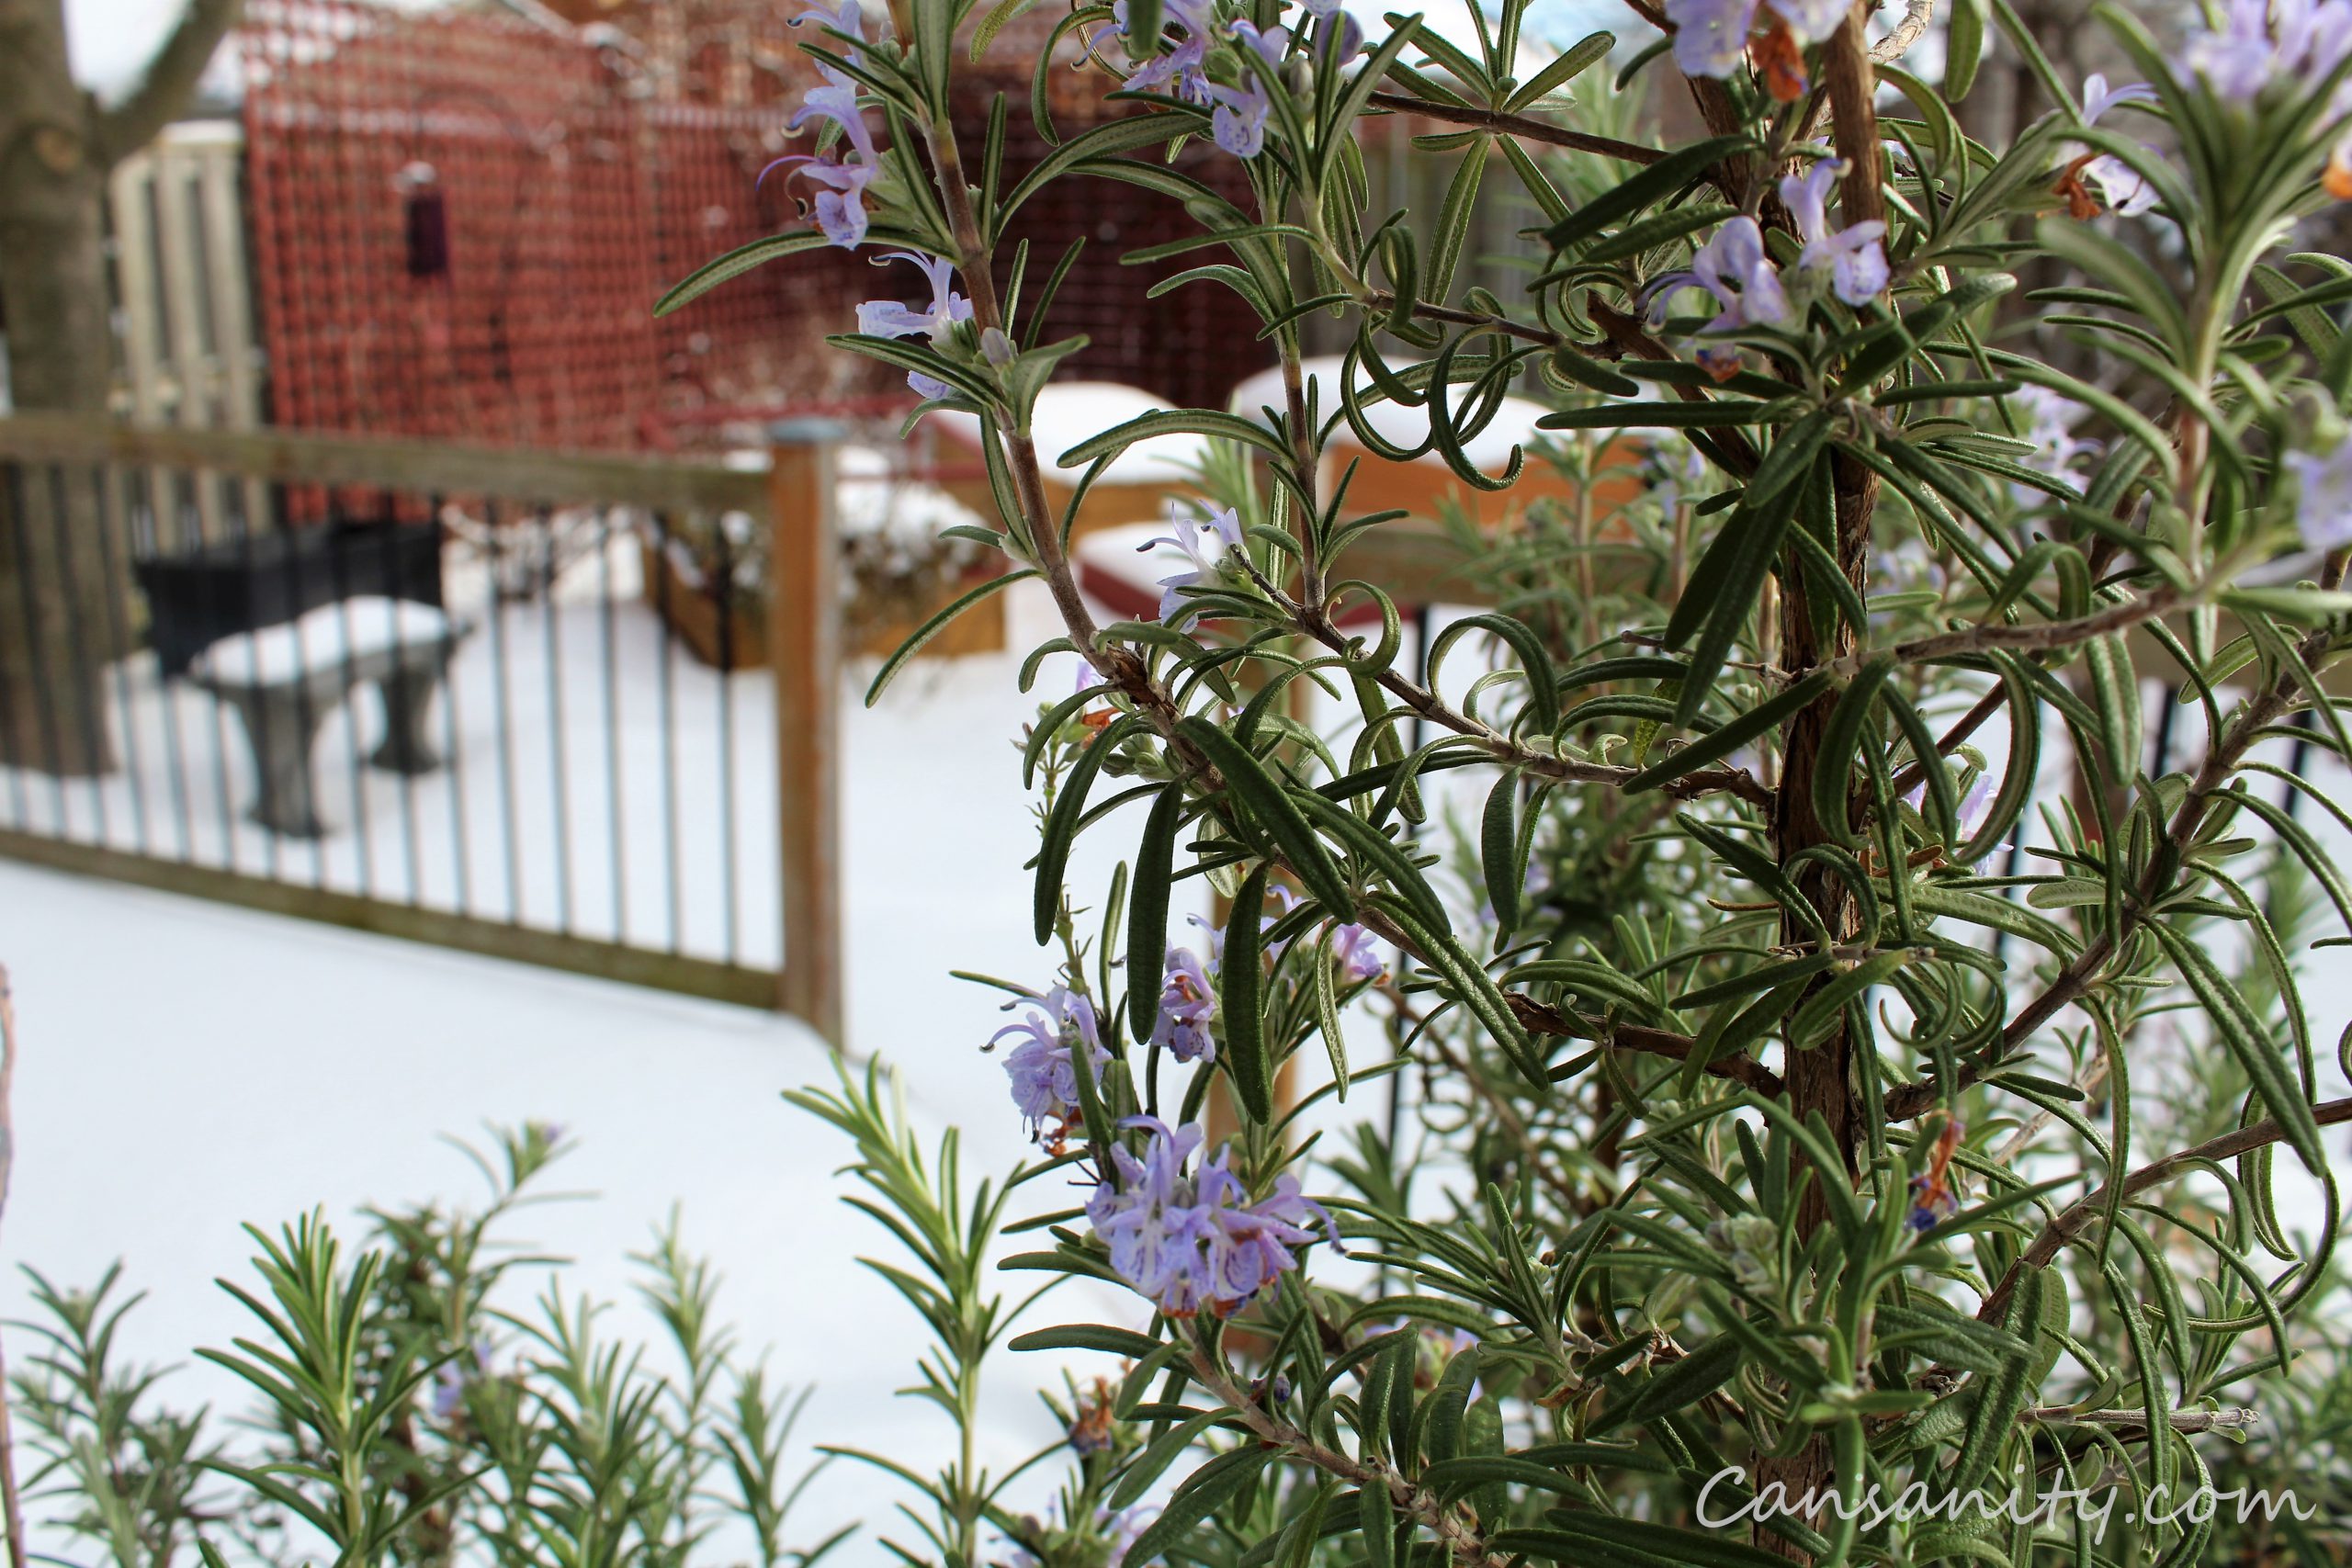 Rosemary blooming in winter 2021